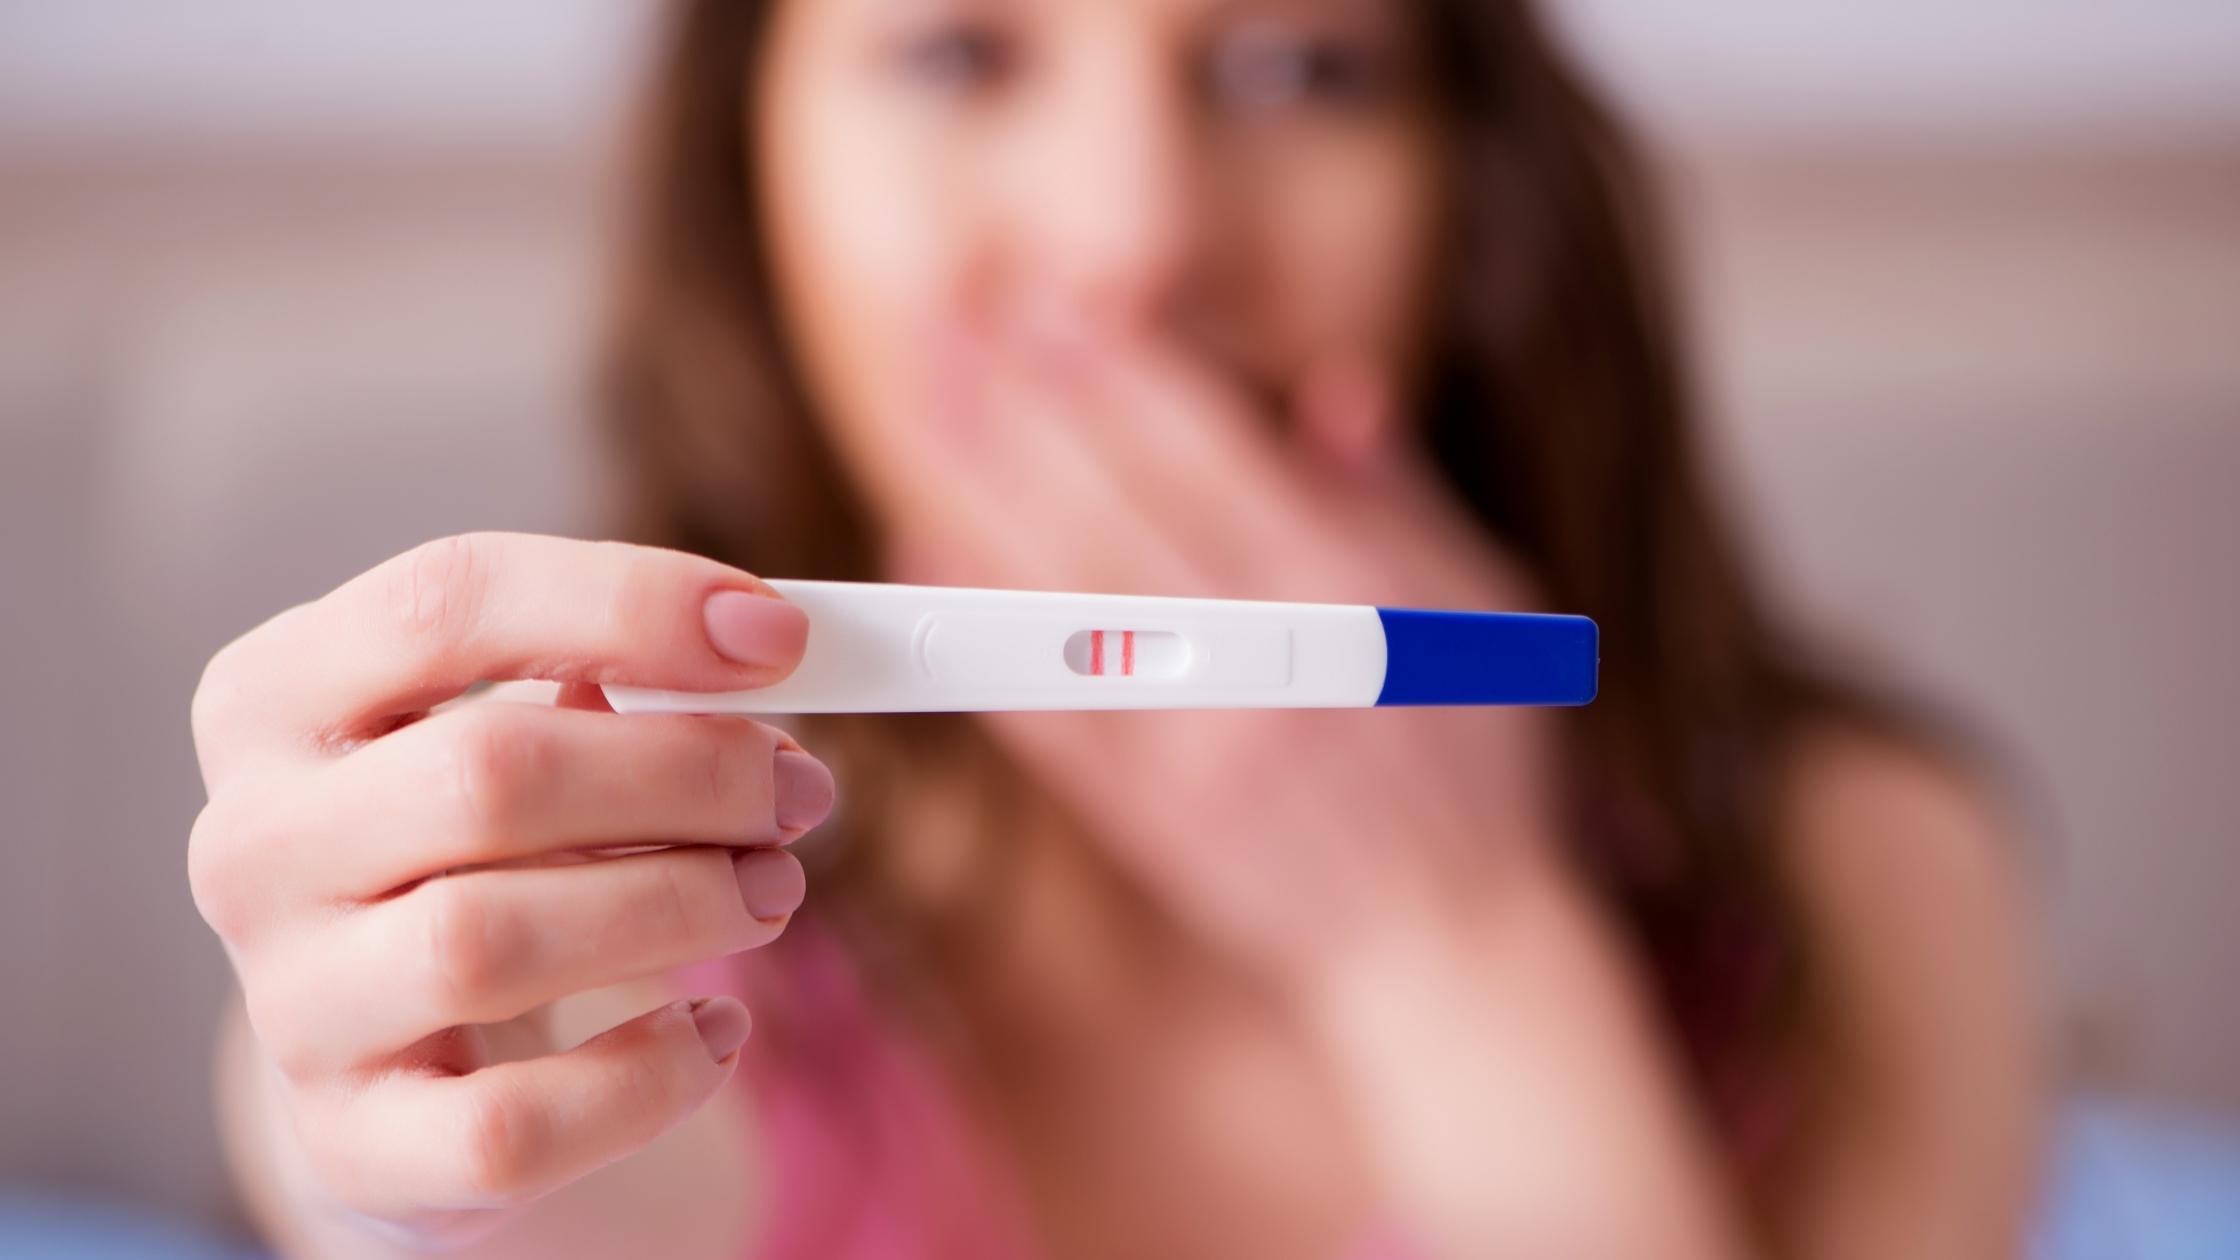 What Should You Do After a Positive Pregnancy Test?